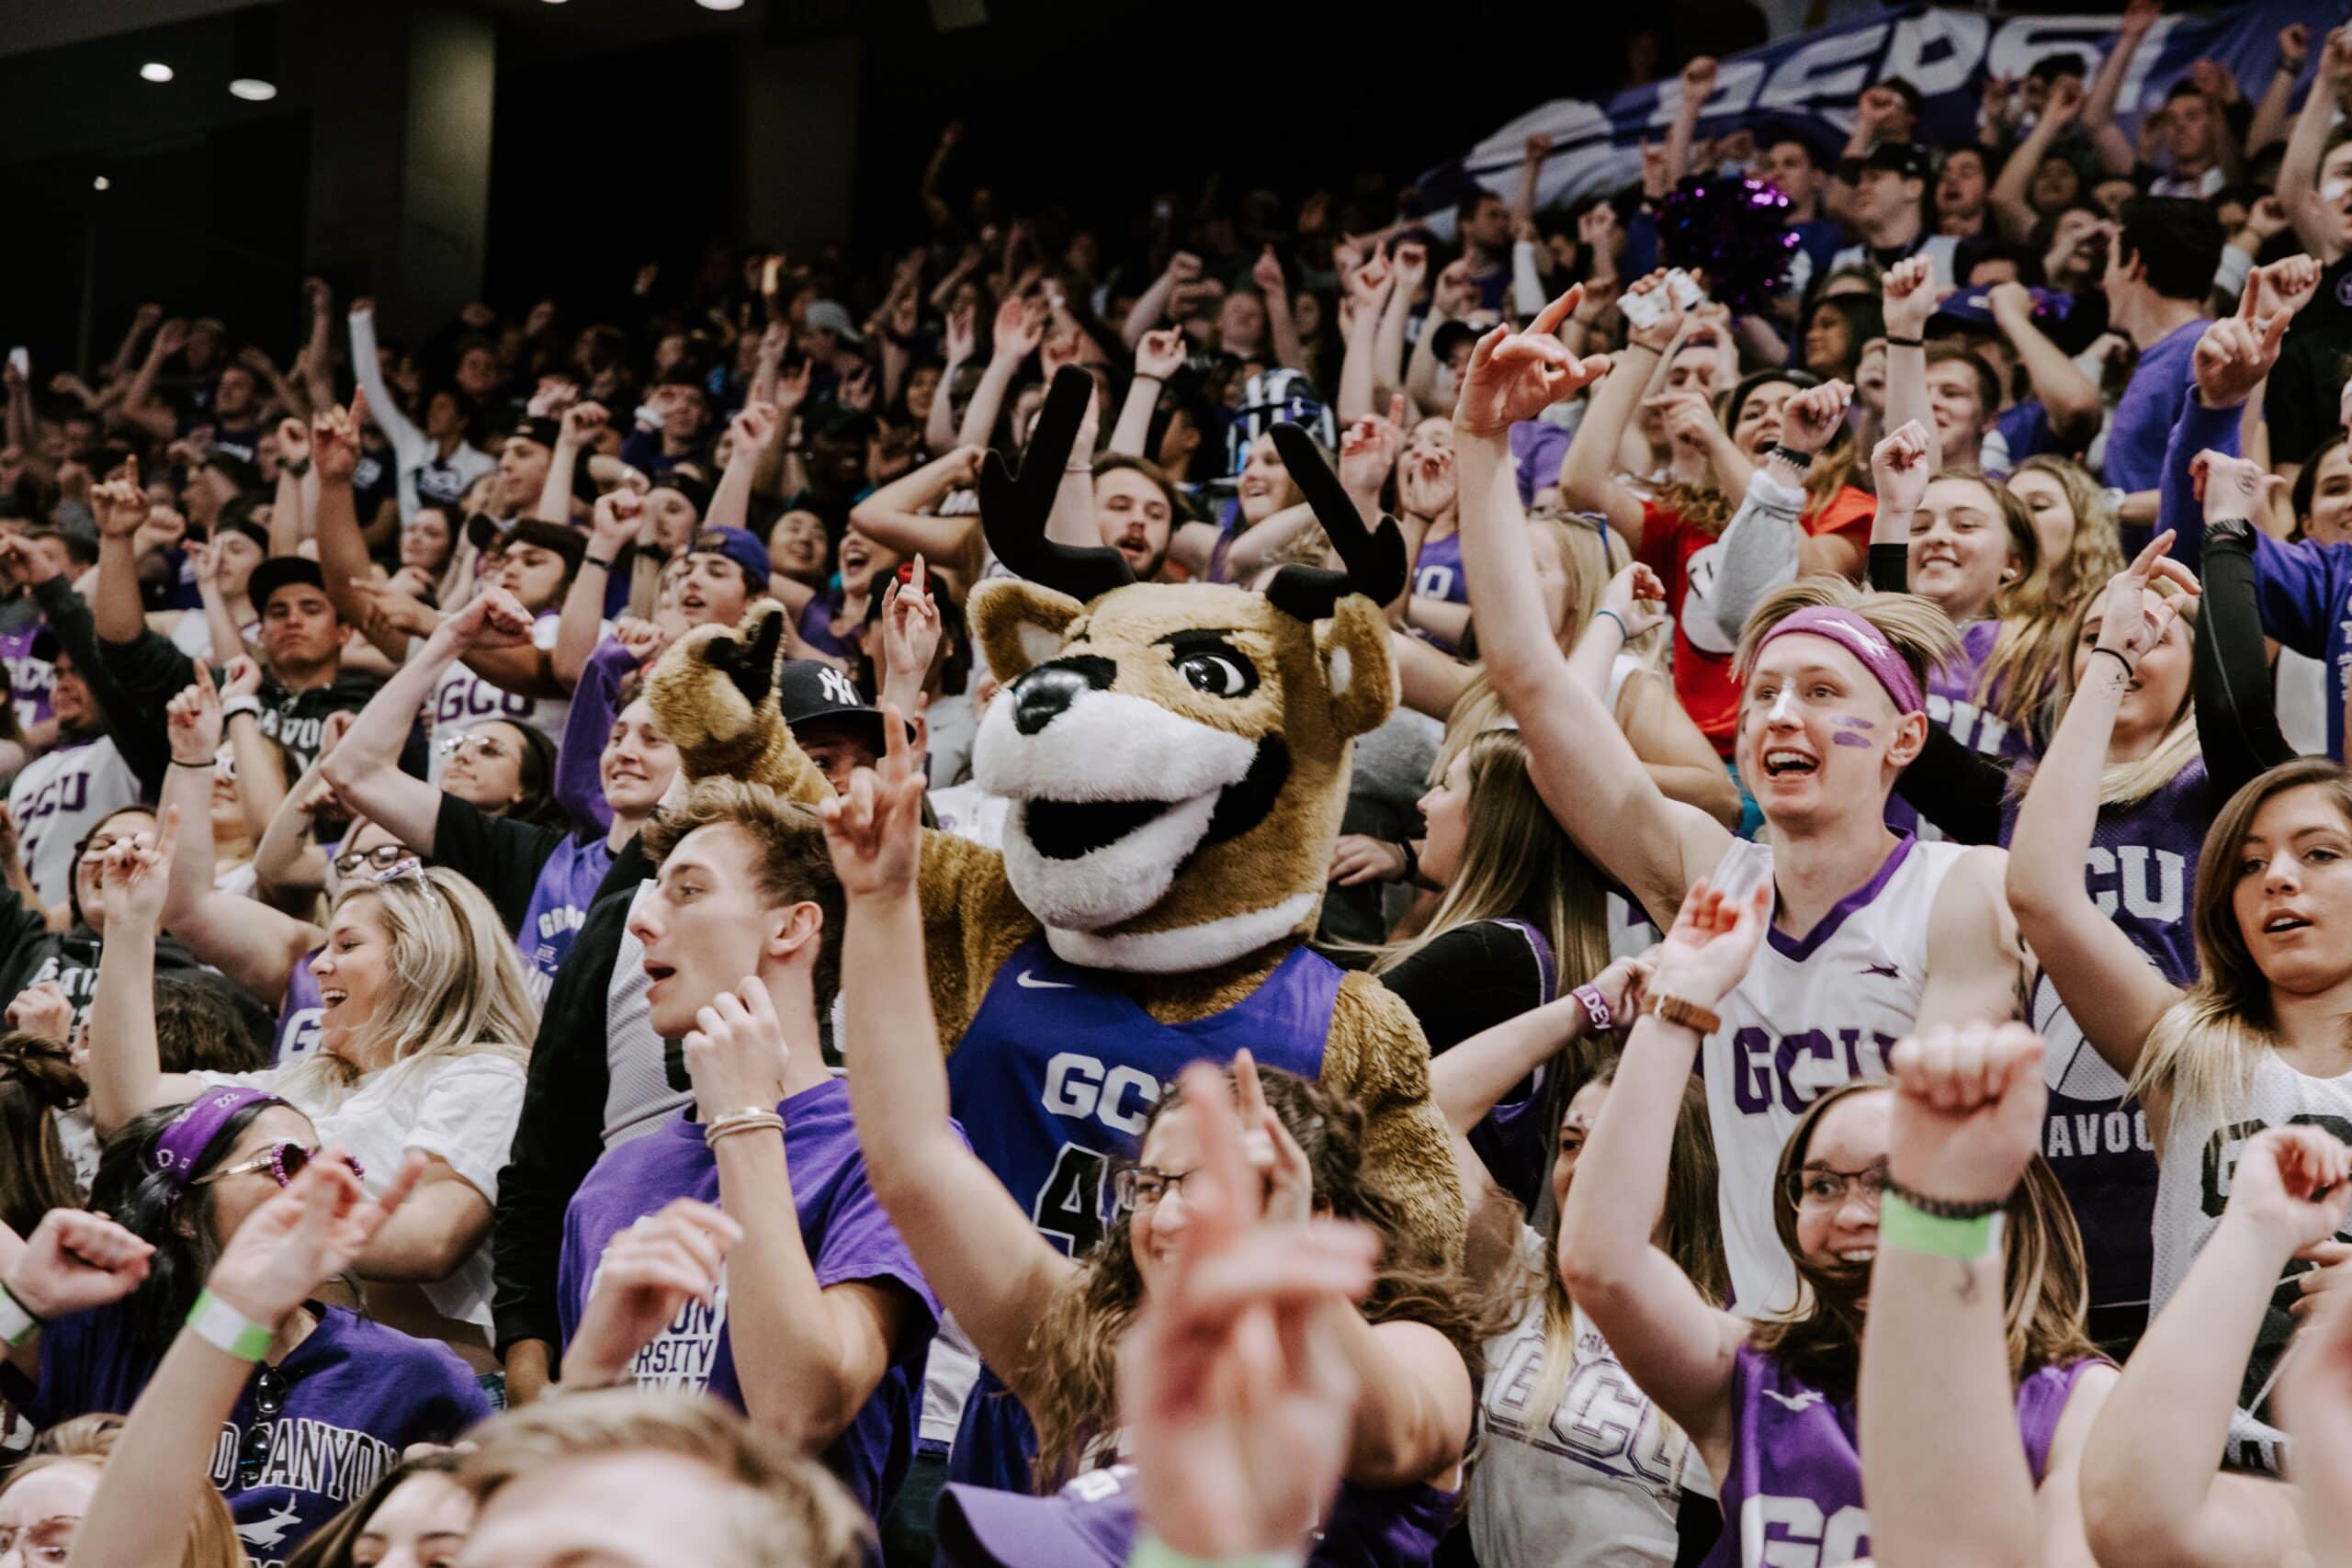 GCU Havocs student section, a sea of purple and white, dancing and cheering around their mascot.